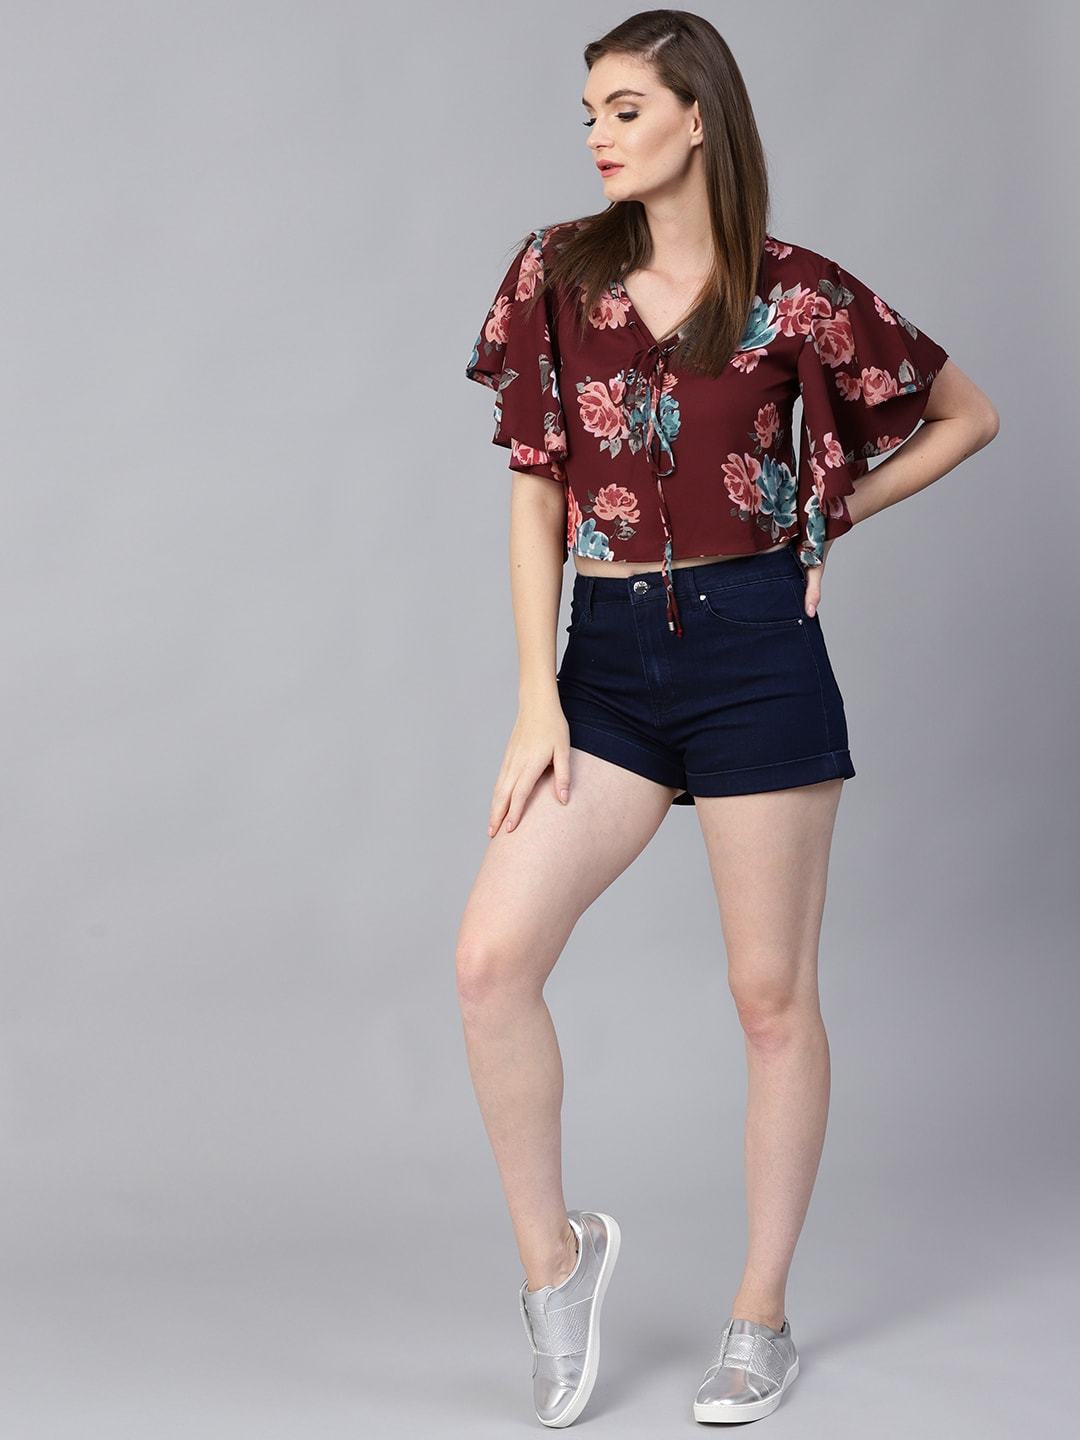 Women's Floral Flare Sleeves Top - Pannkh